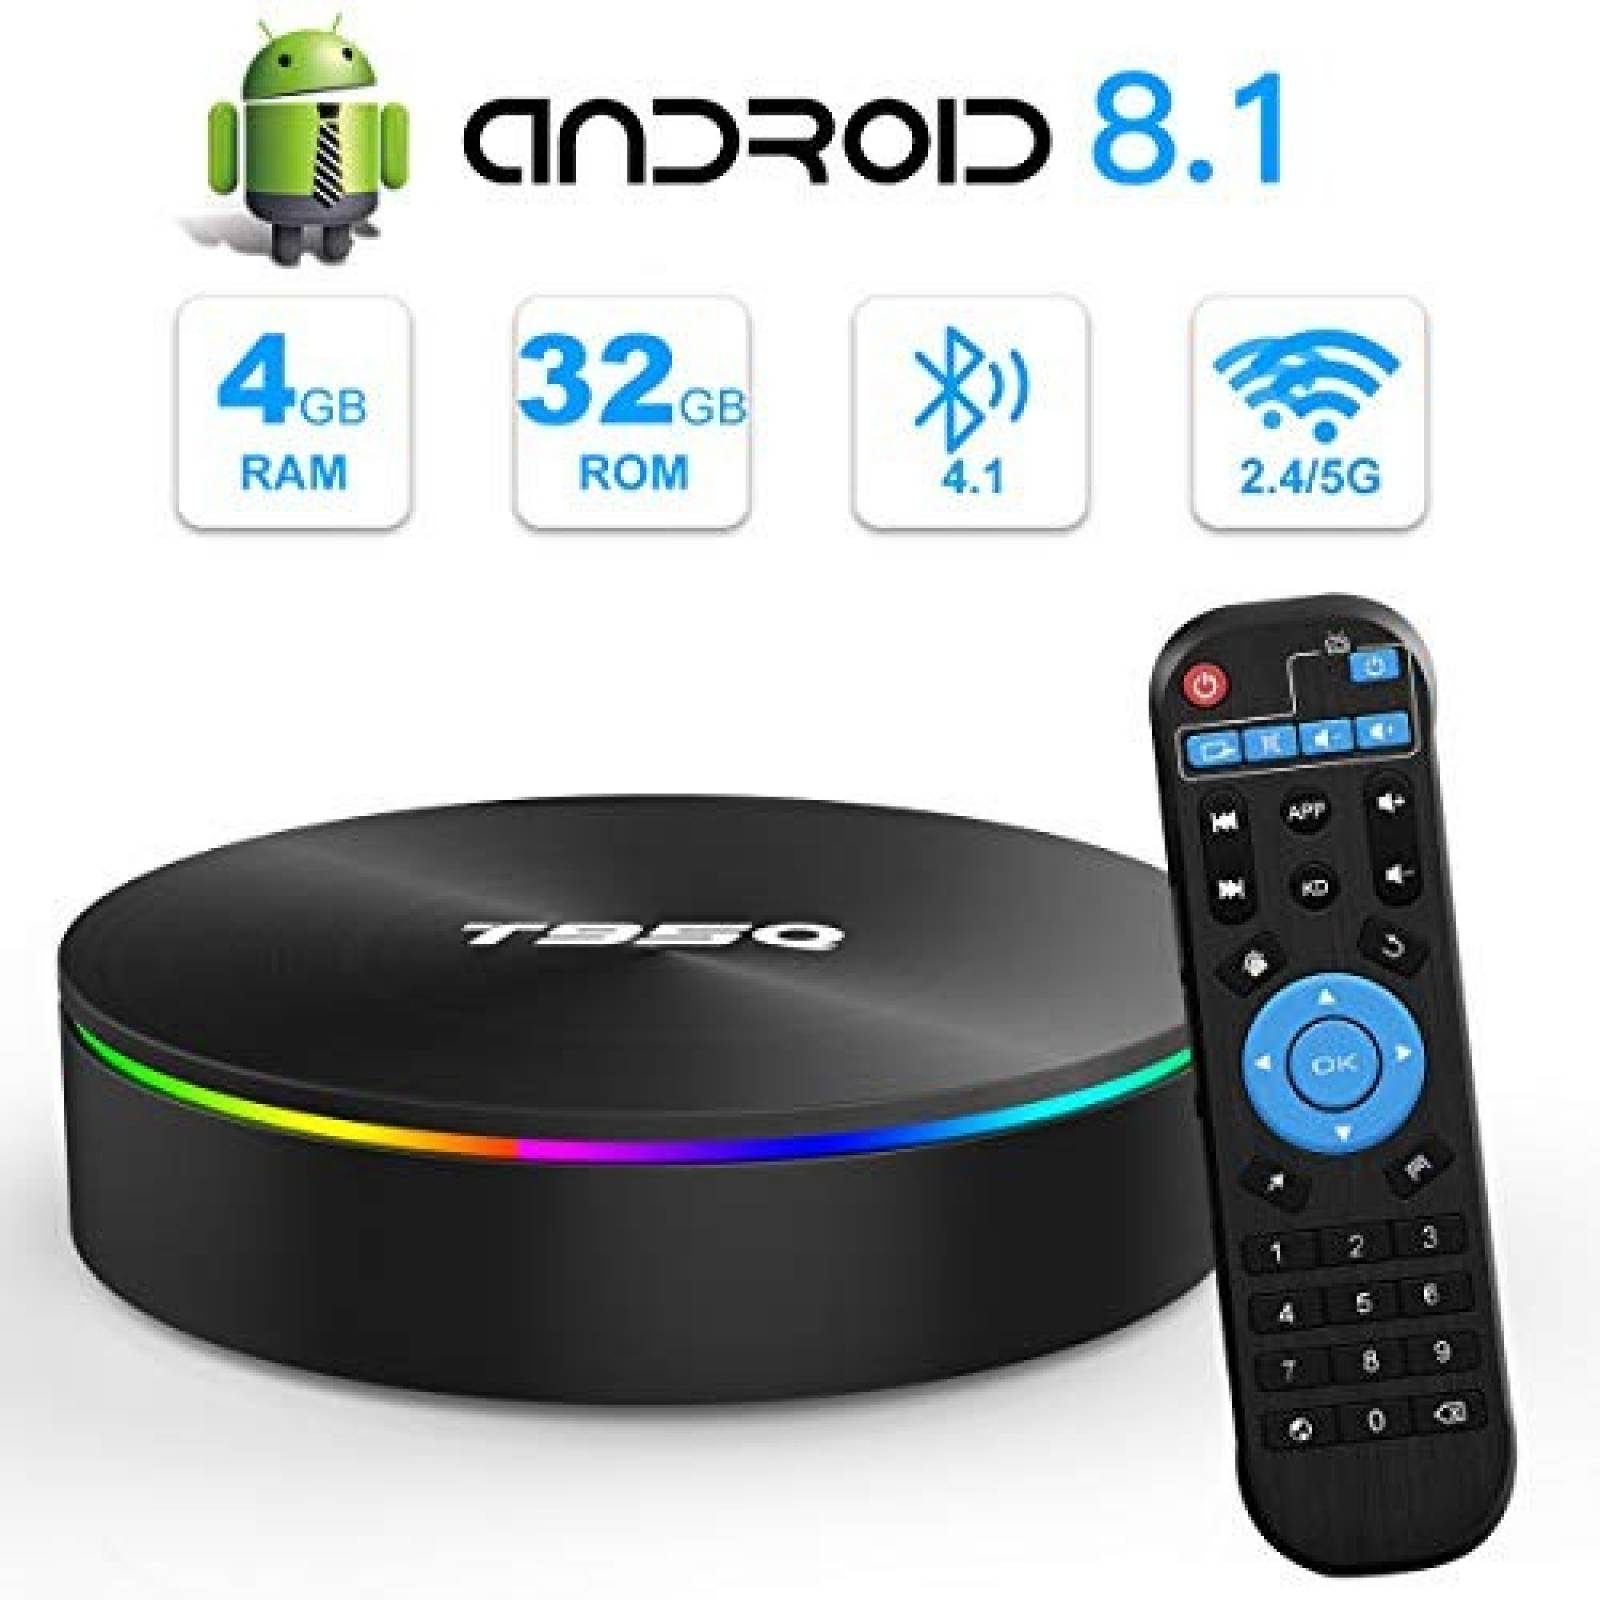 Reproductor Multimedia en Streaming YAGALA T95Q Android 8.1